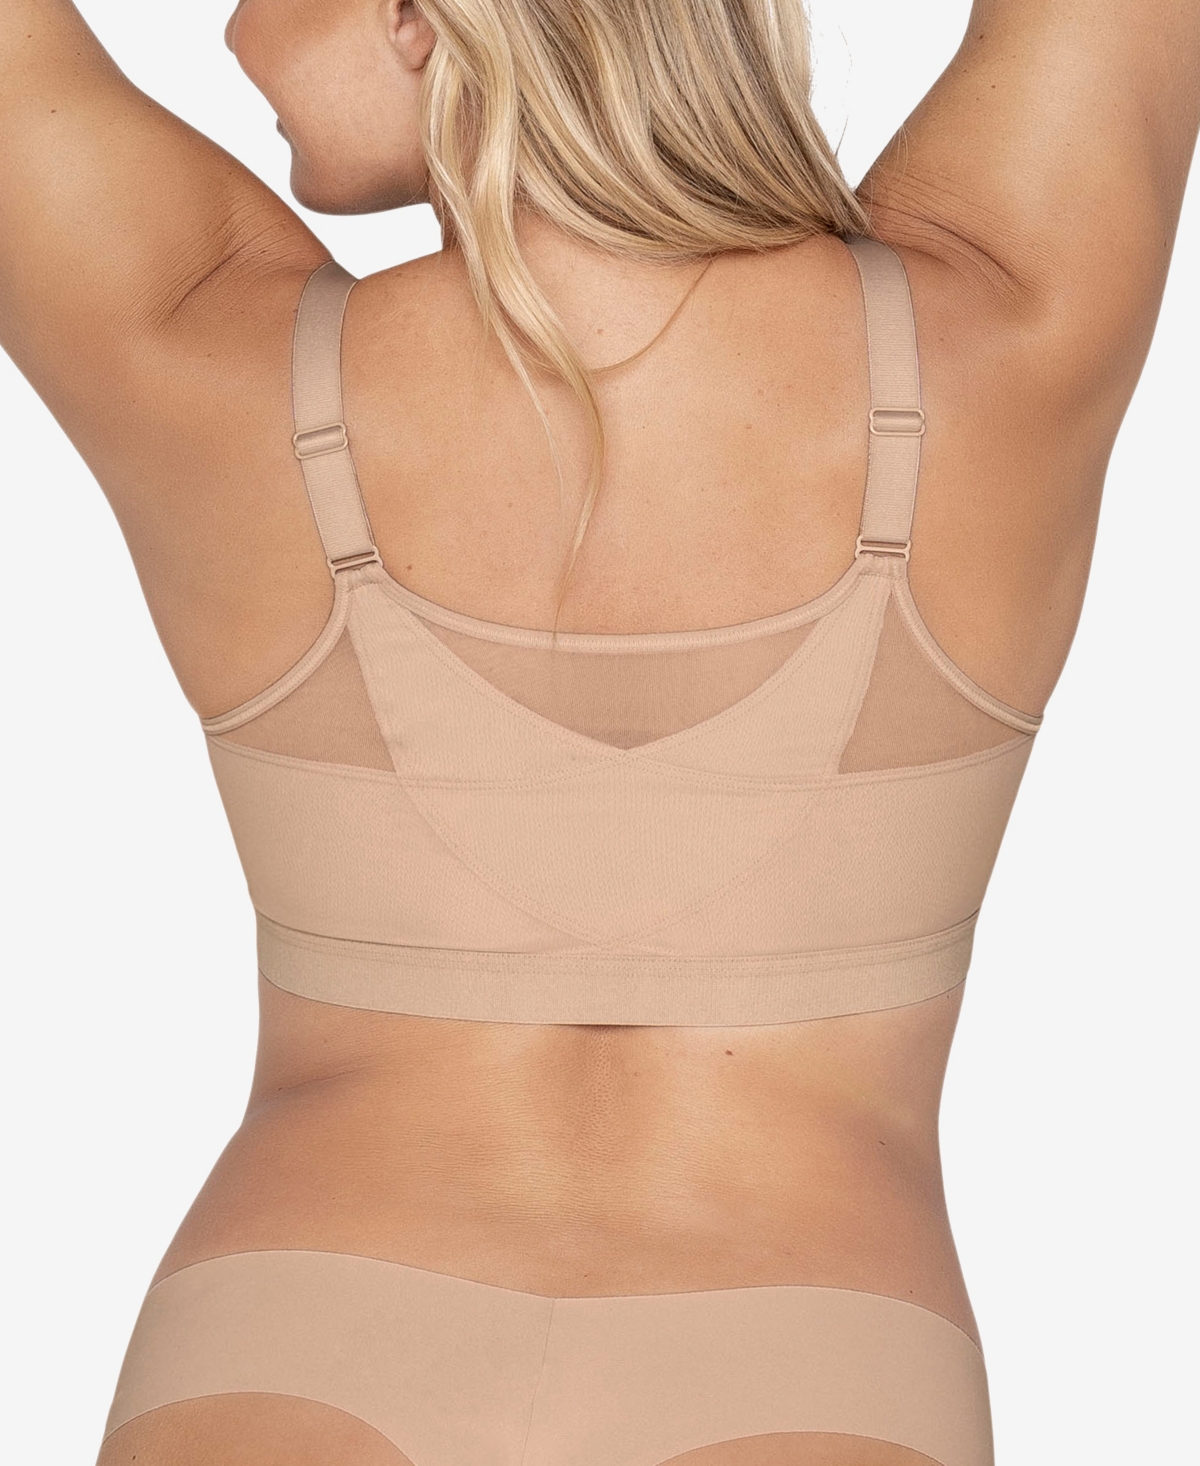 Back Support Posture Corrector Wireless Bra with Contour Cups 011936 - Light Beige